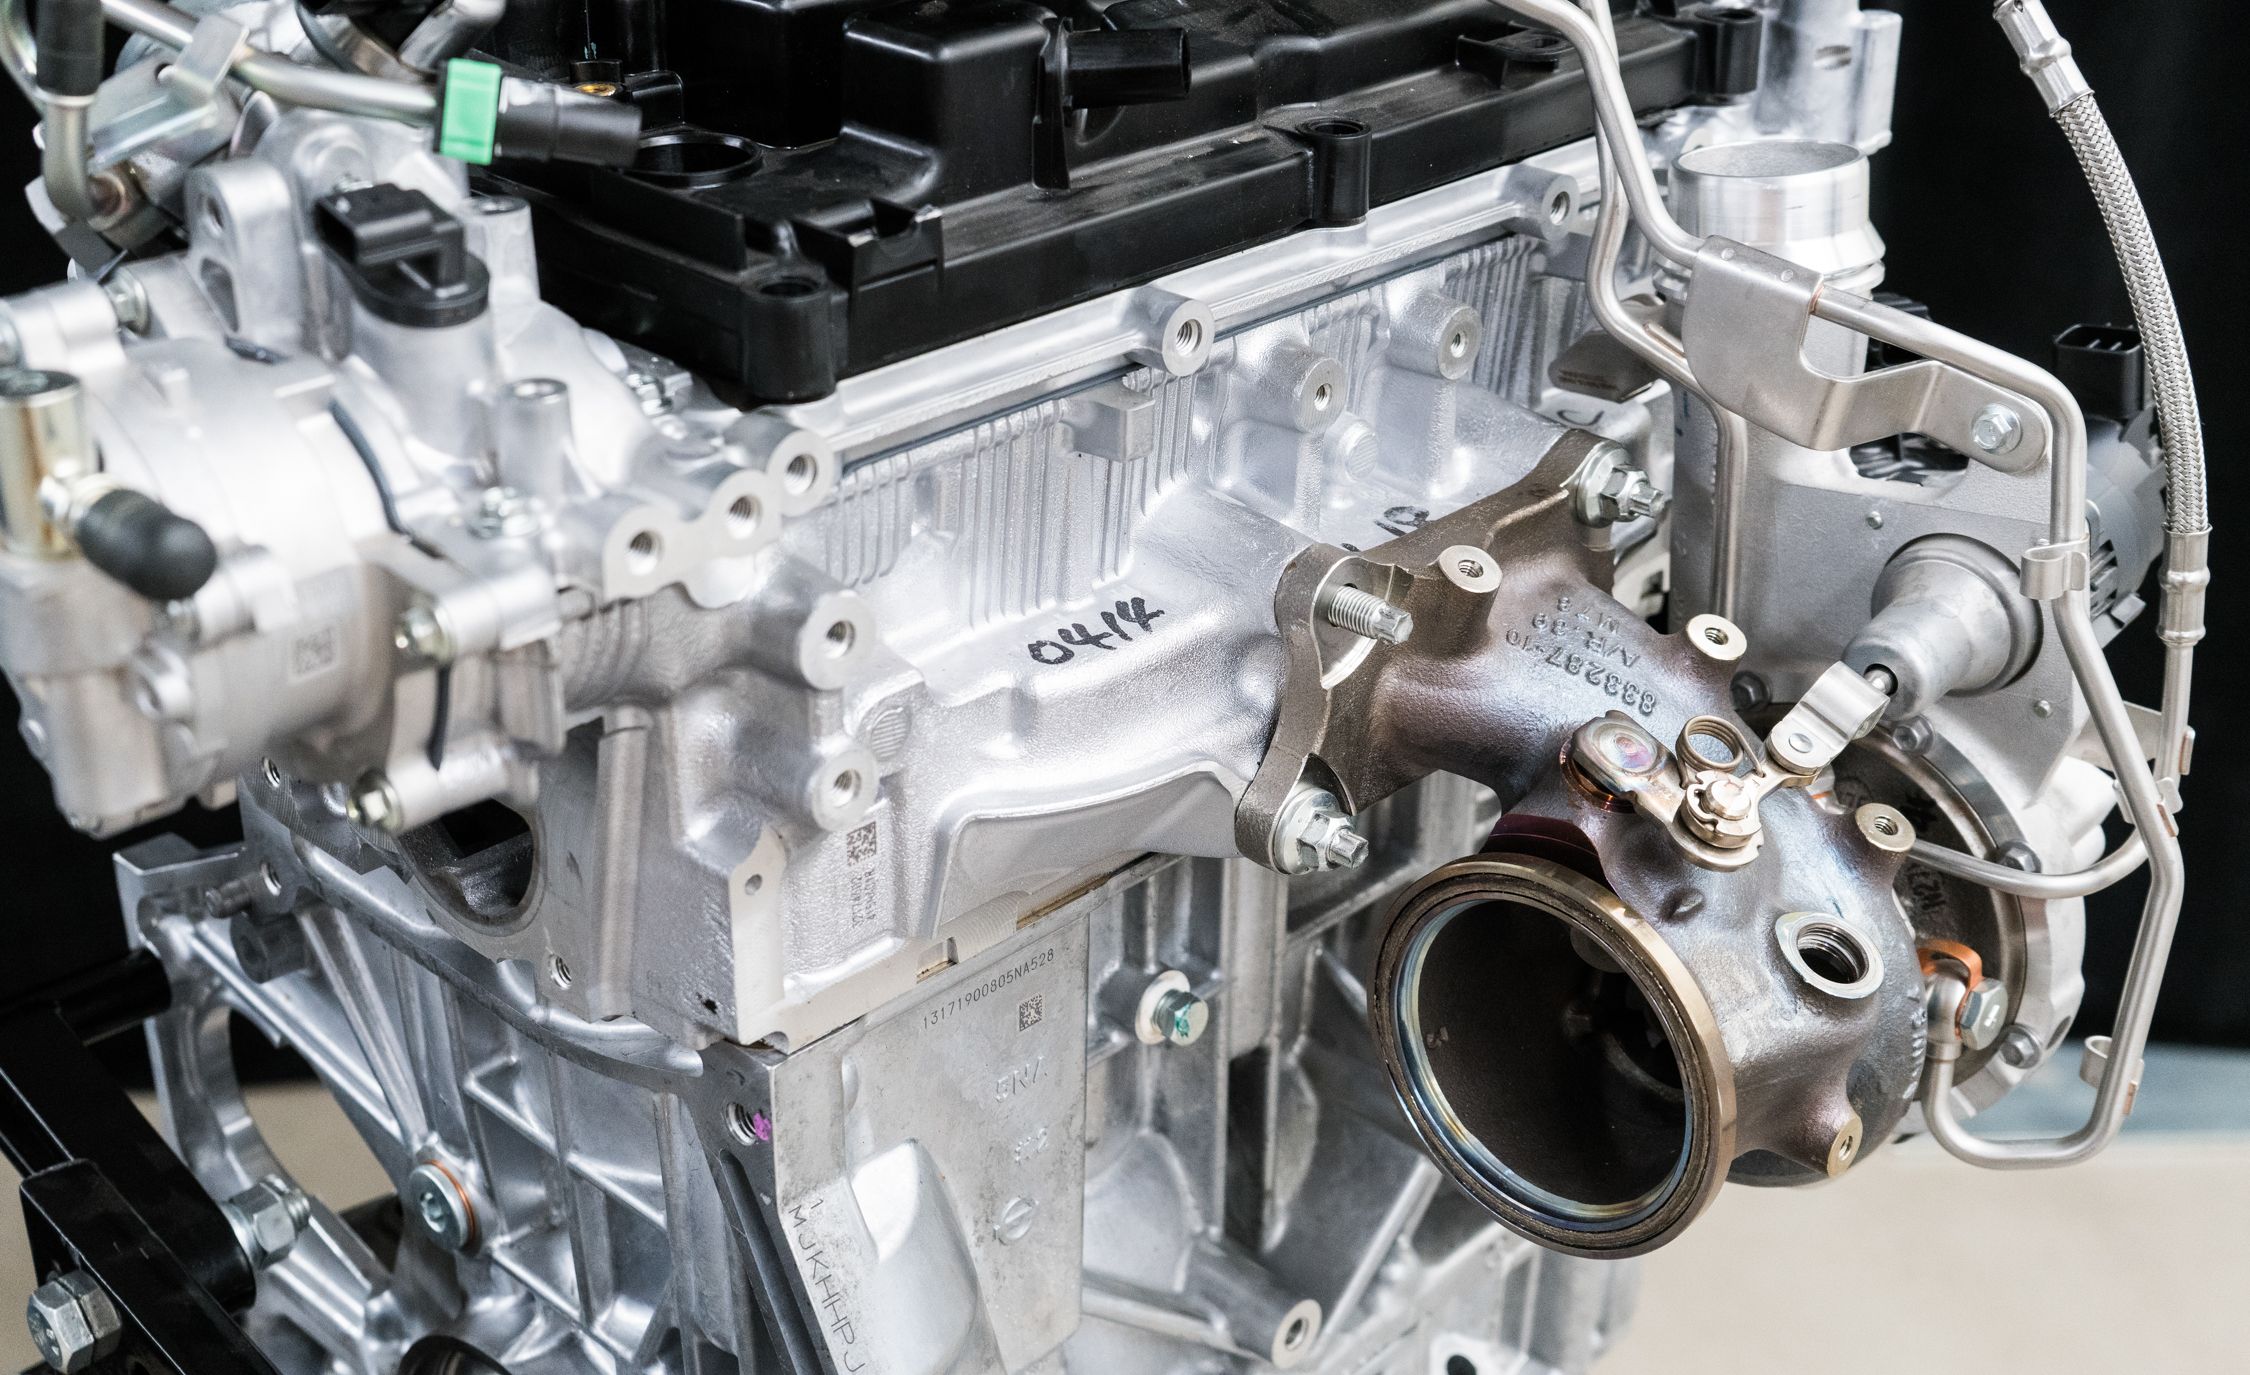 Science Behind Infiniti's Variable-Compression-Ratio Engine